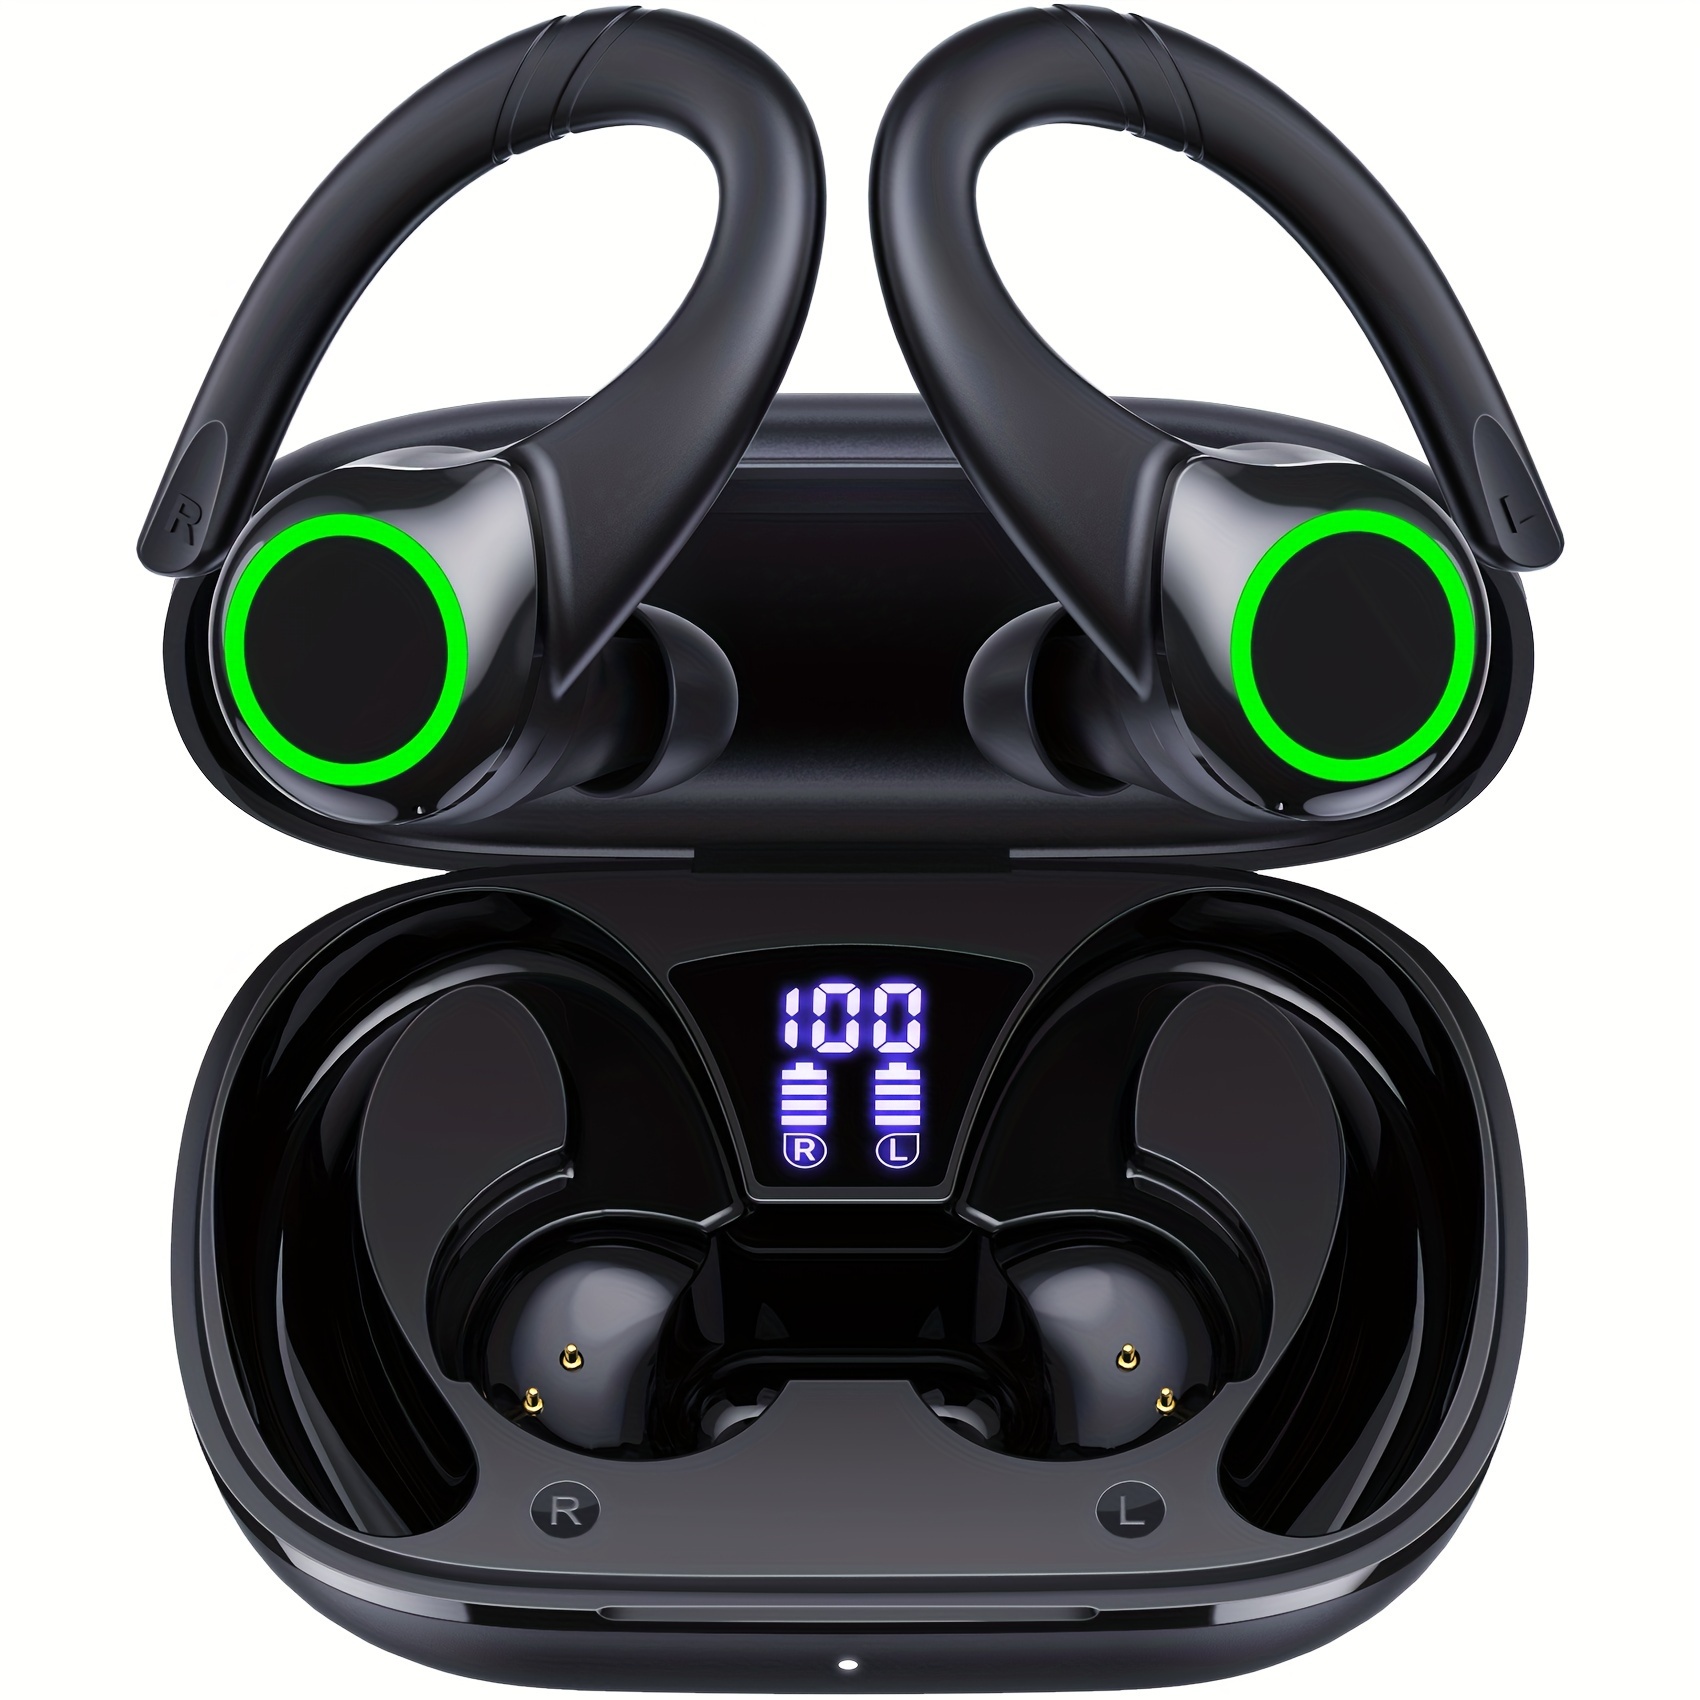 

Wireless Earbuds Sports Earphone Wireless With Led Display 400mah Charging Case 64 Hrs Playback In-ear Headphones Built-in Mic For Running/working